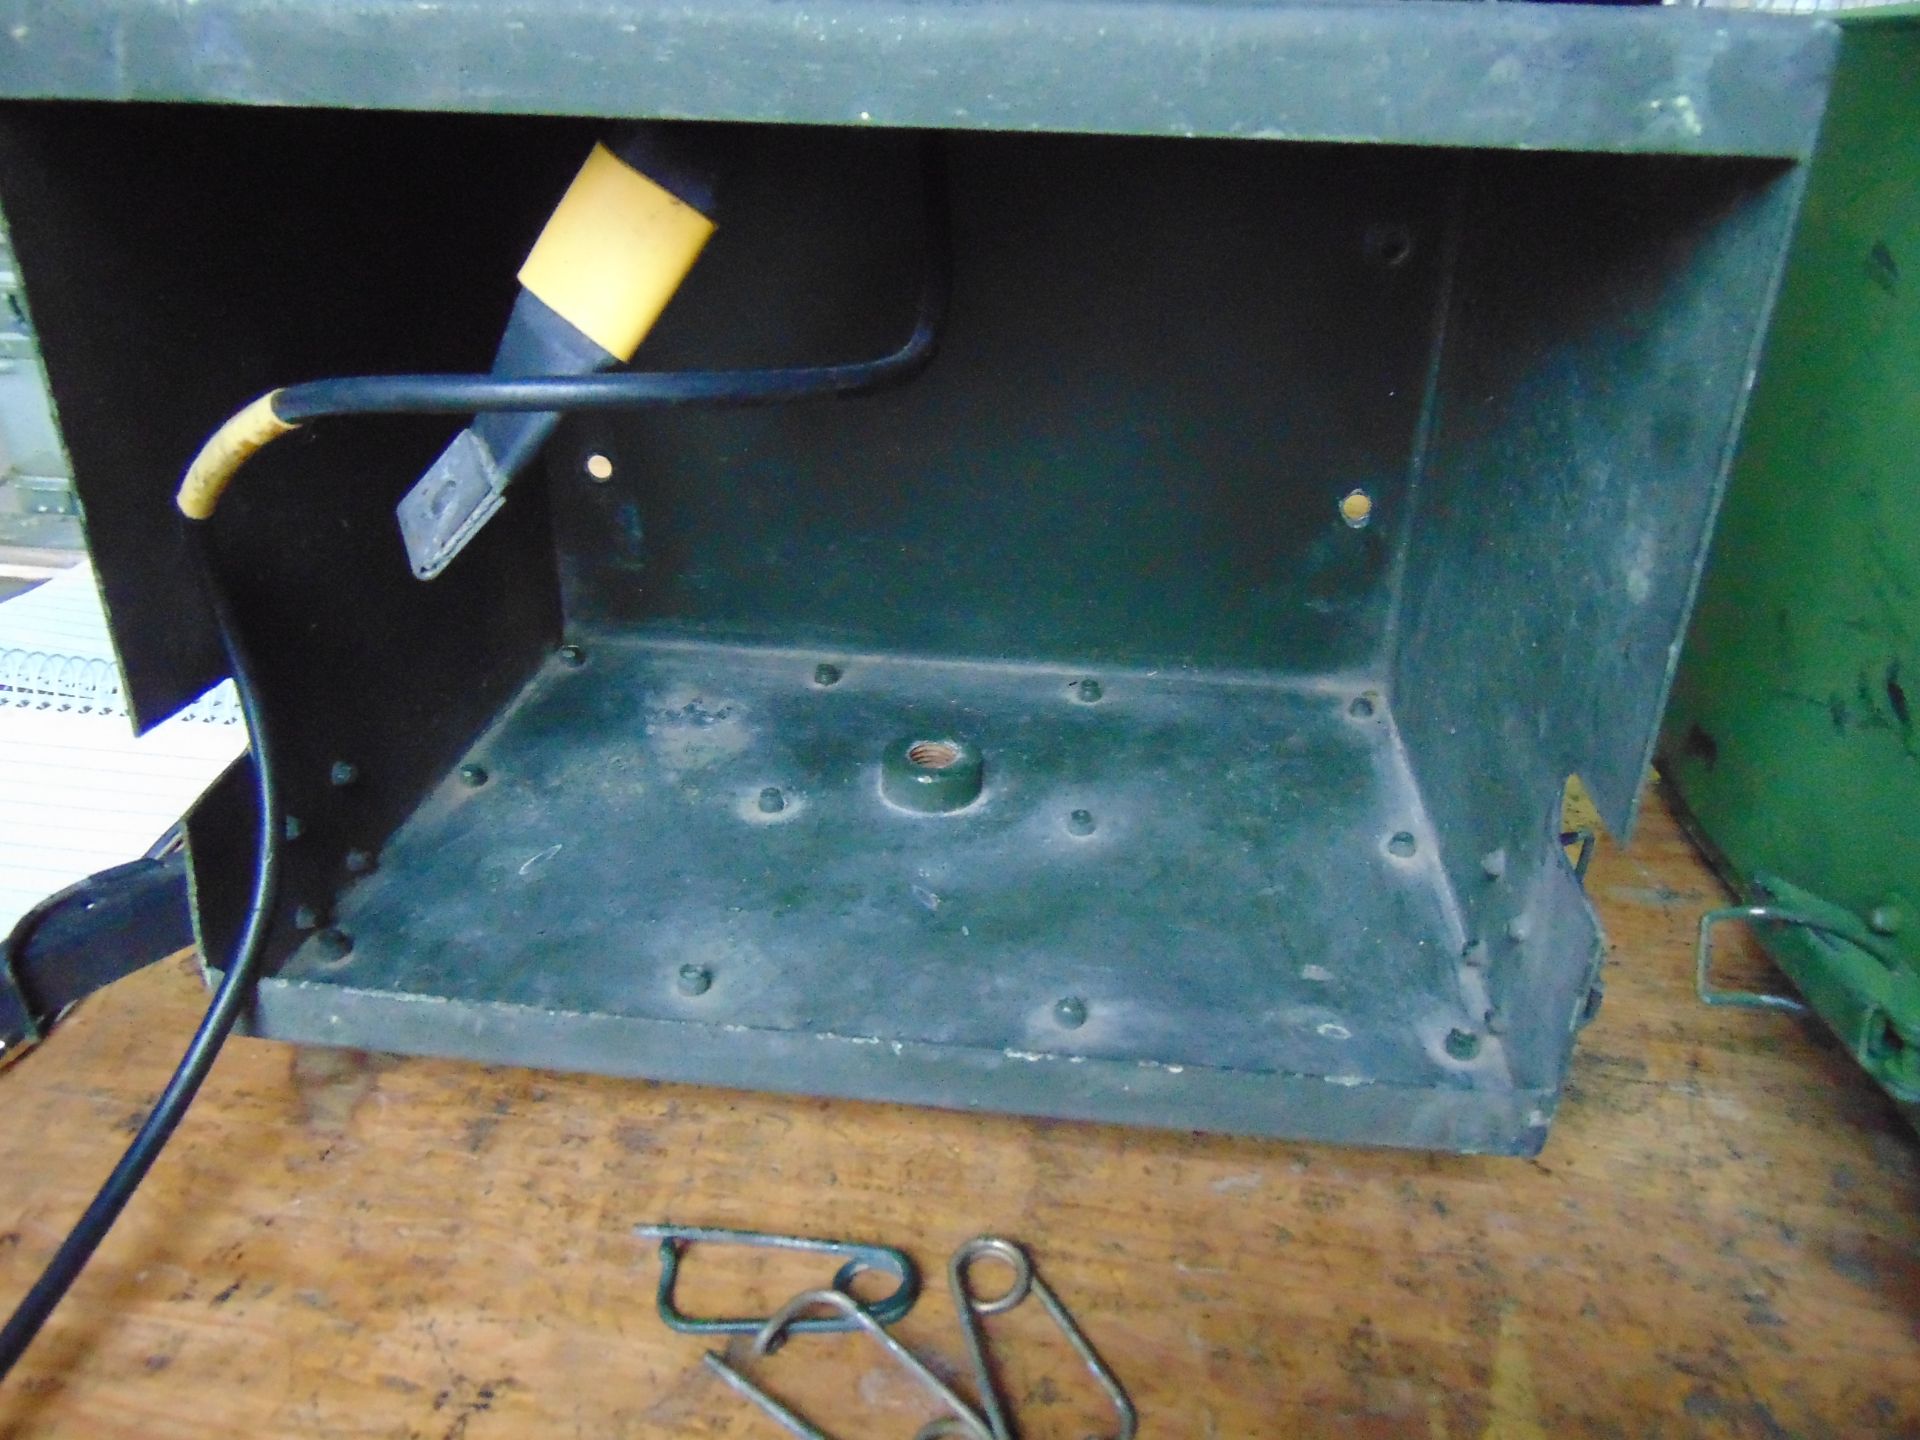 2 x Land Rover FFR Antenna Wing Boxes c/w Base and Tuning Unit - Image 3 of 5